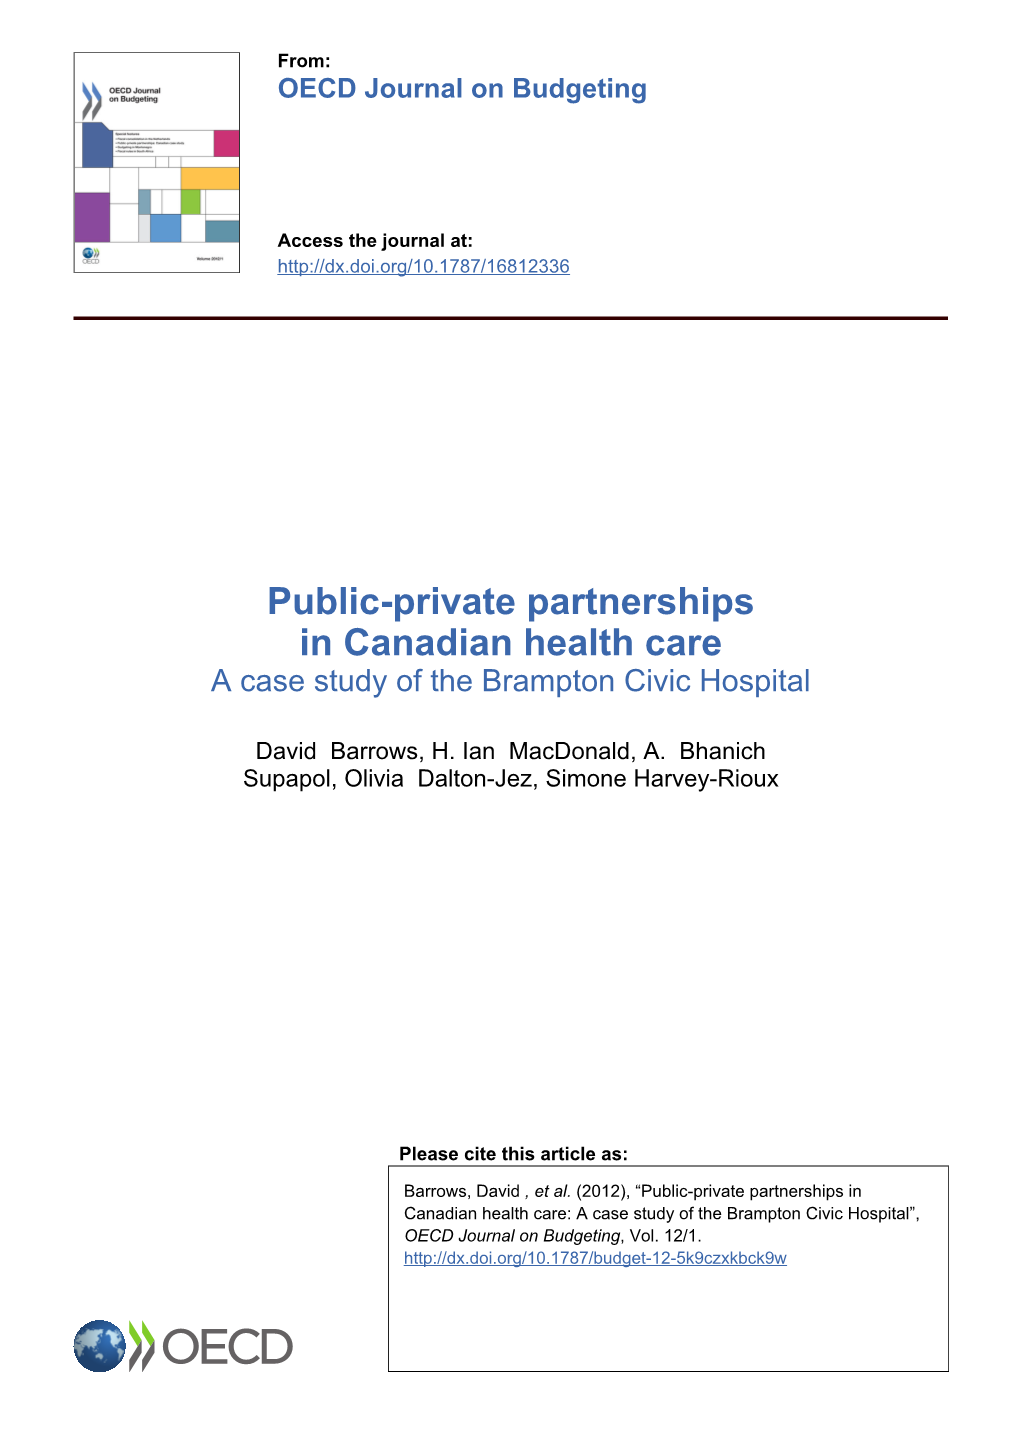 Public-Private Partnerships in Canadian Health Care a Case Study of the Brampton Civic Hospital